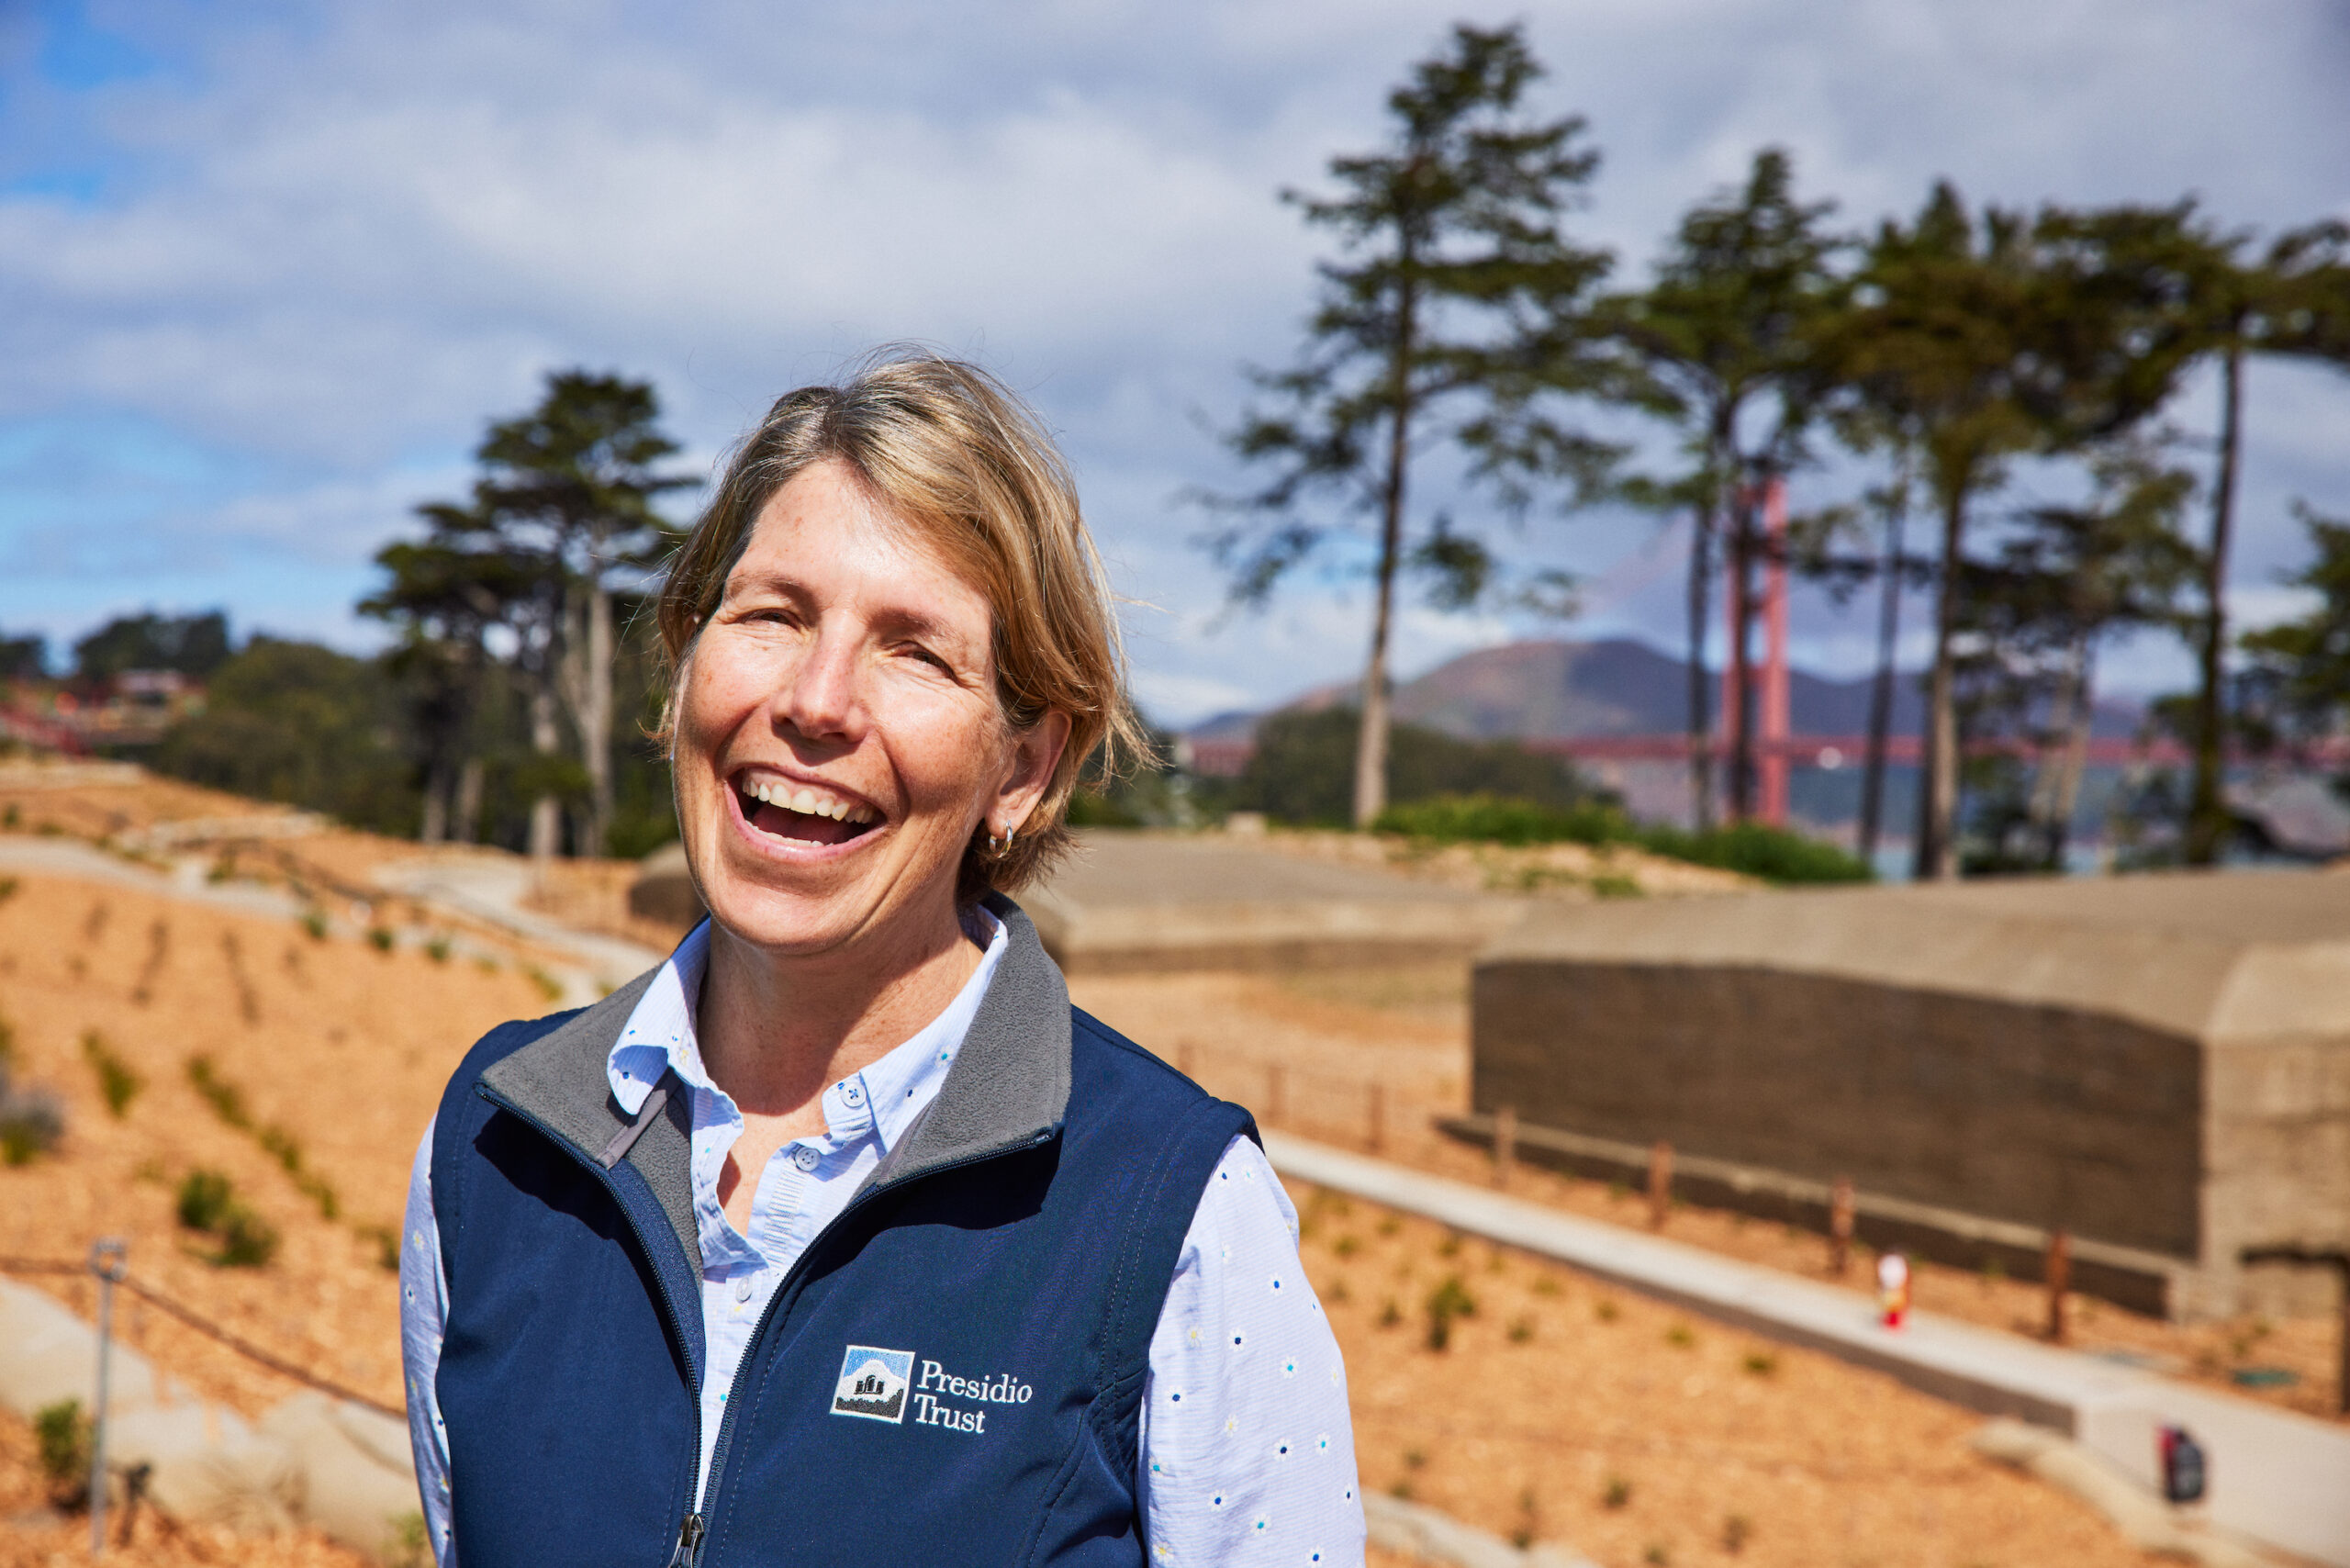 The Q&A: Presidio Trust CEO reveals her dream project and favorite spot (and it’s not Tunnel Tops)